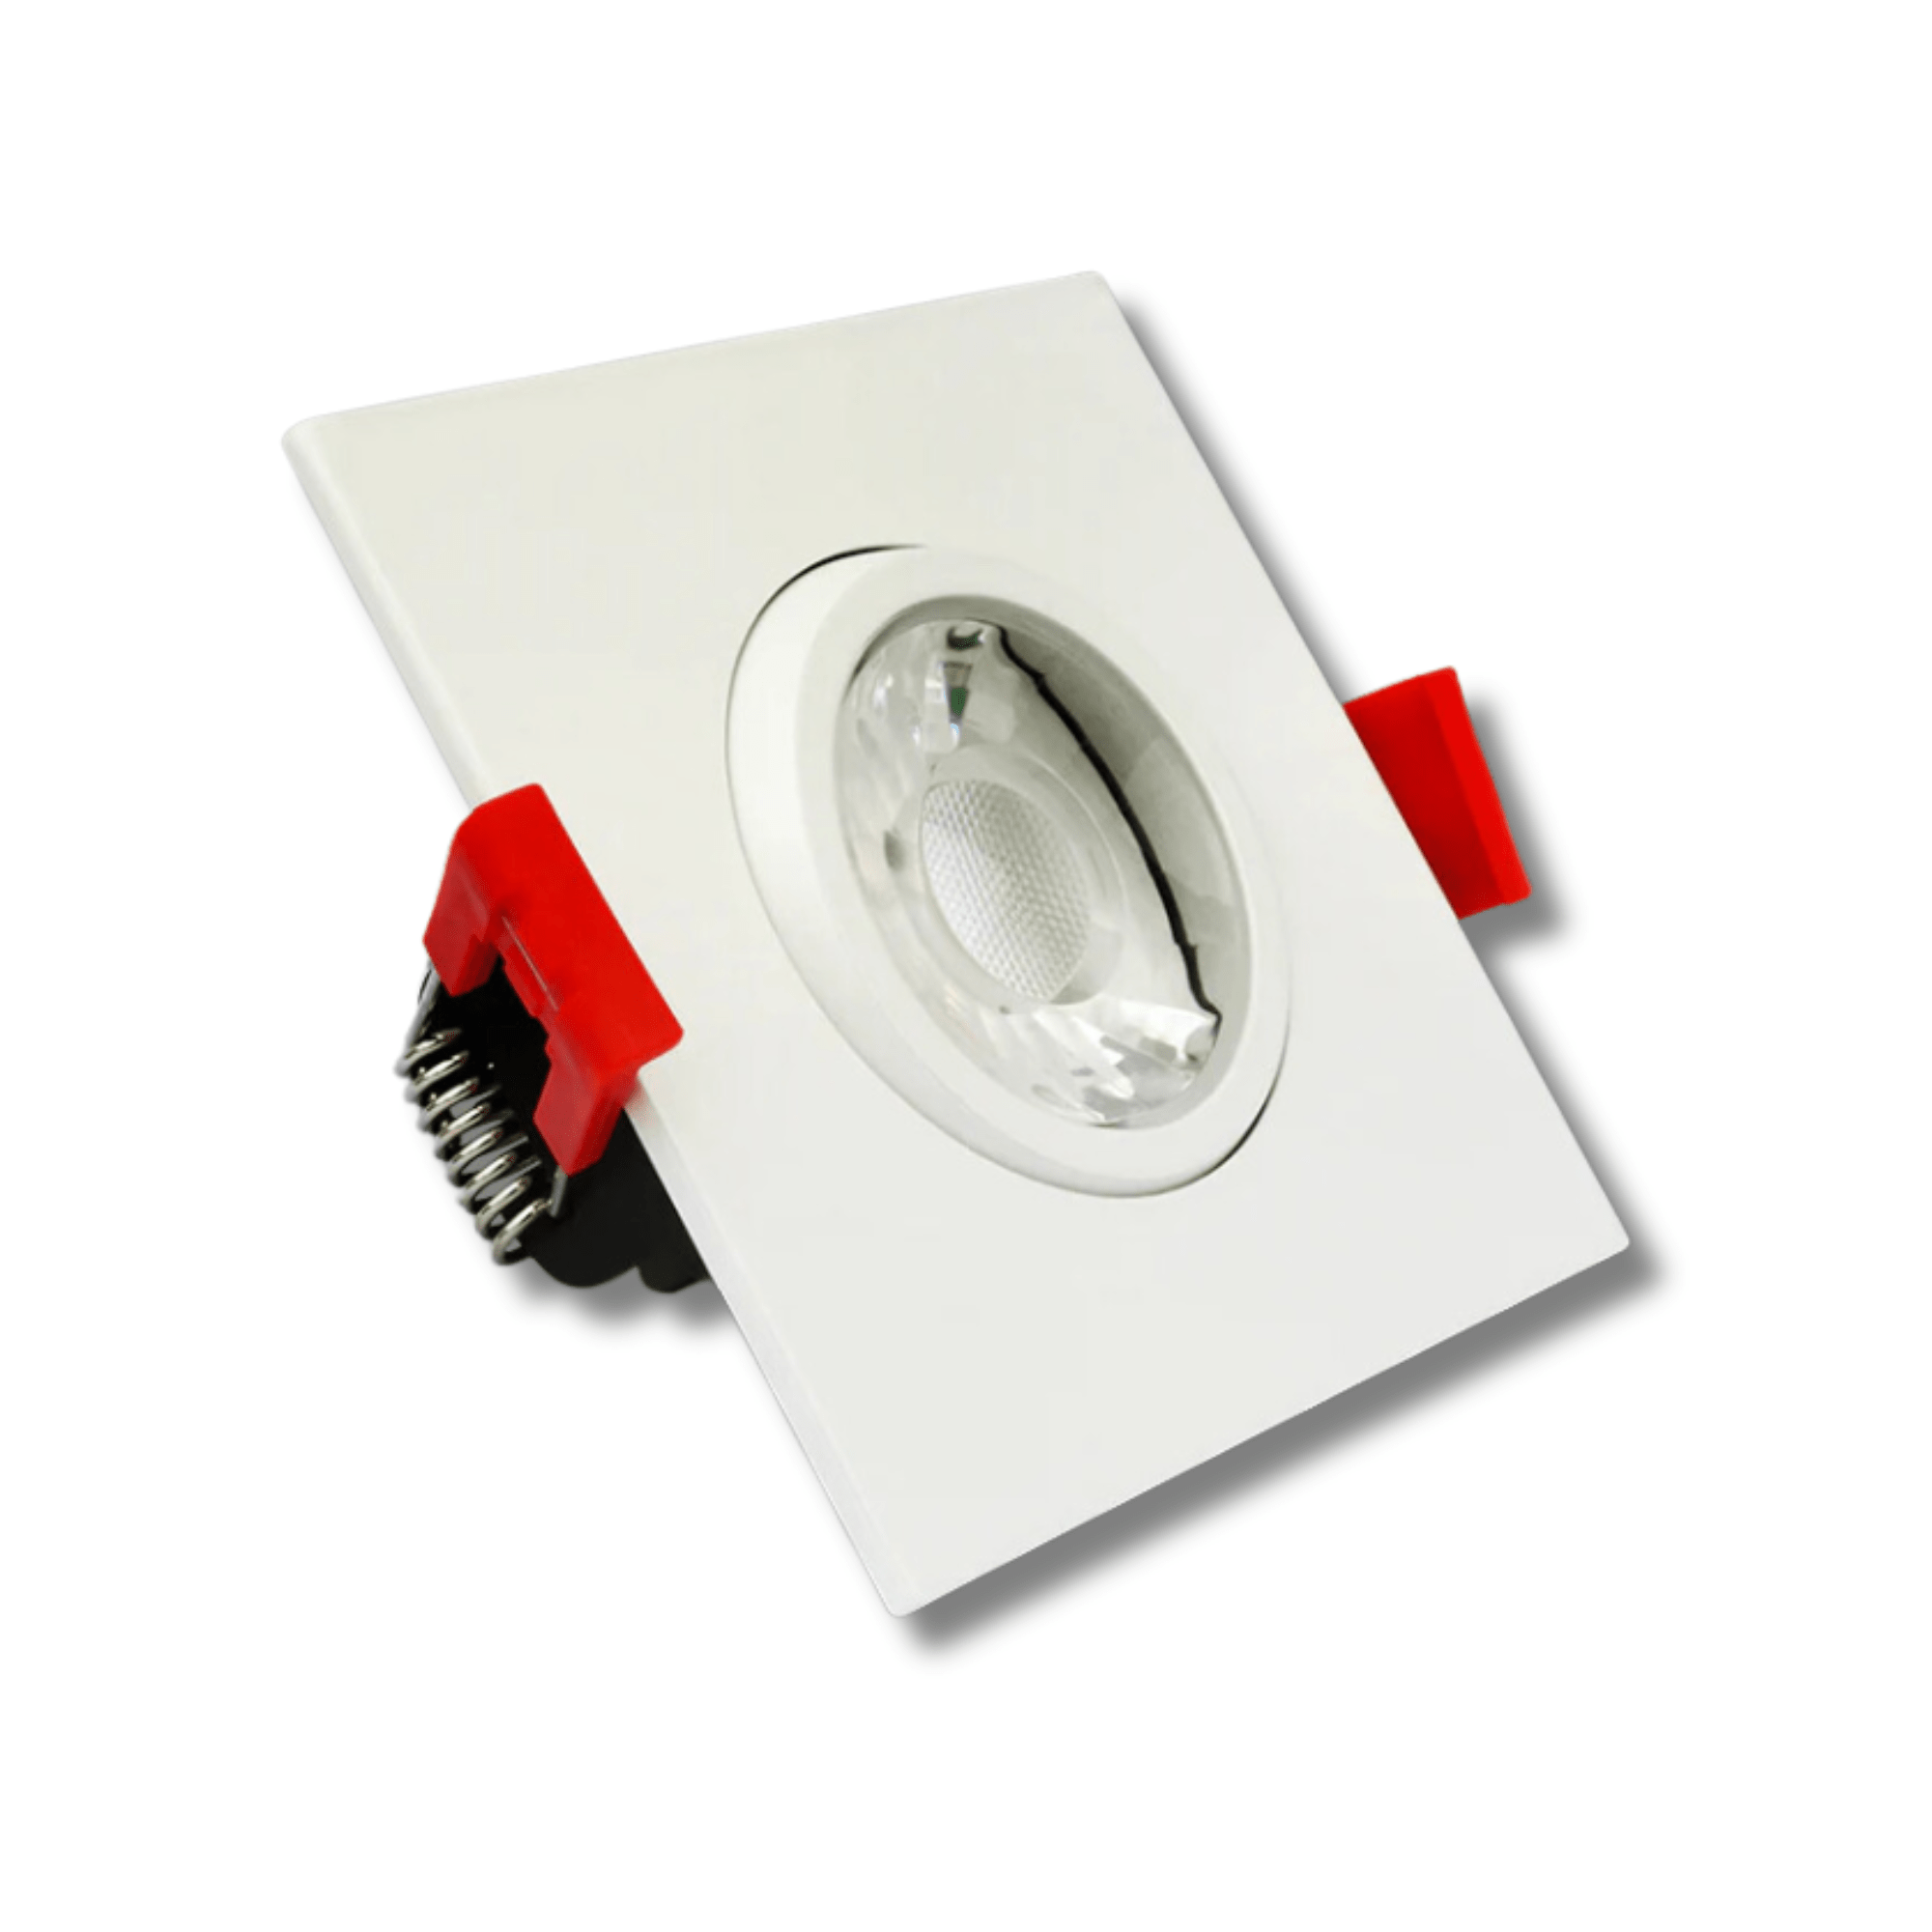 Buy LED Adjustable Square Natural Daylight Recessed Ceiling Downlight 6W 6500K White - SJD-08 | Shop at Supply Master Accra, Ghana Lamps & Lightings Buy Tools hardware Building materials